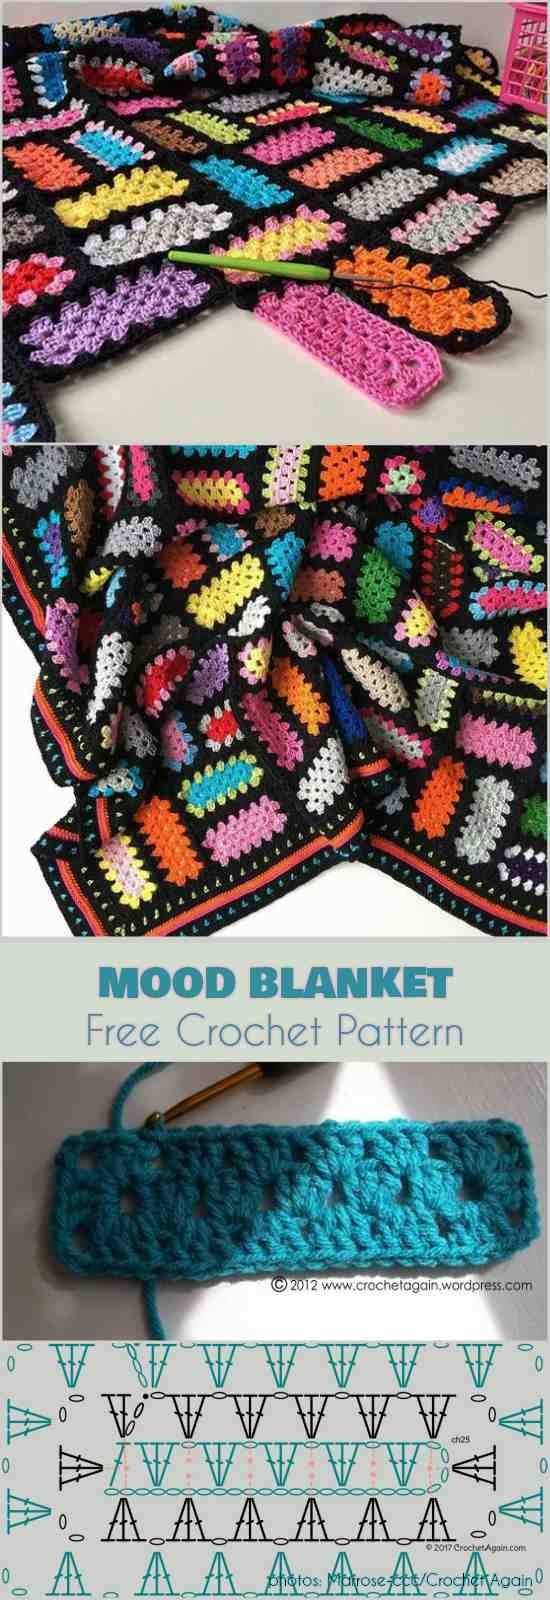 Mood Blanket from A Better Granny Rectangle Free Crochet Pattern